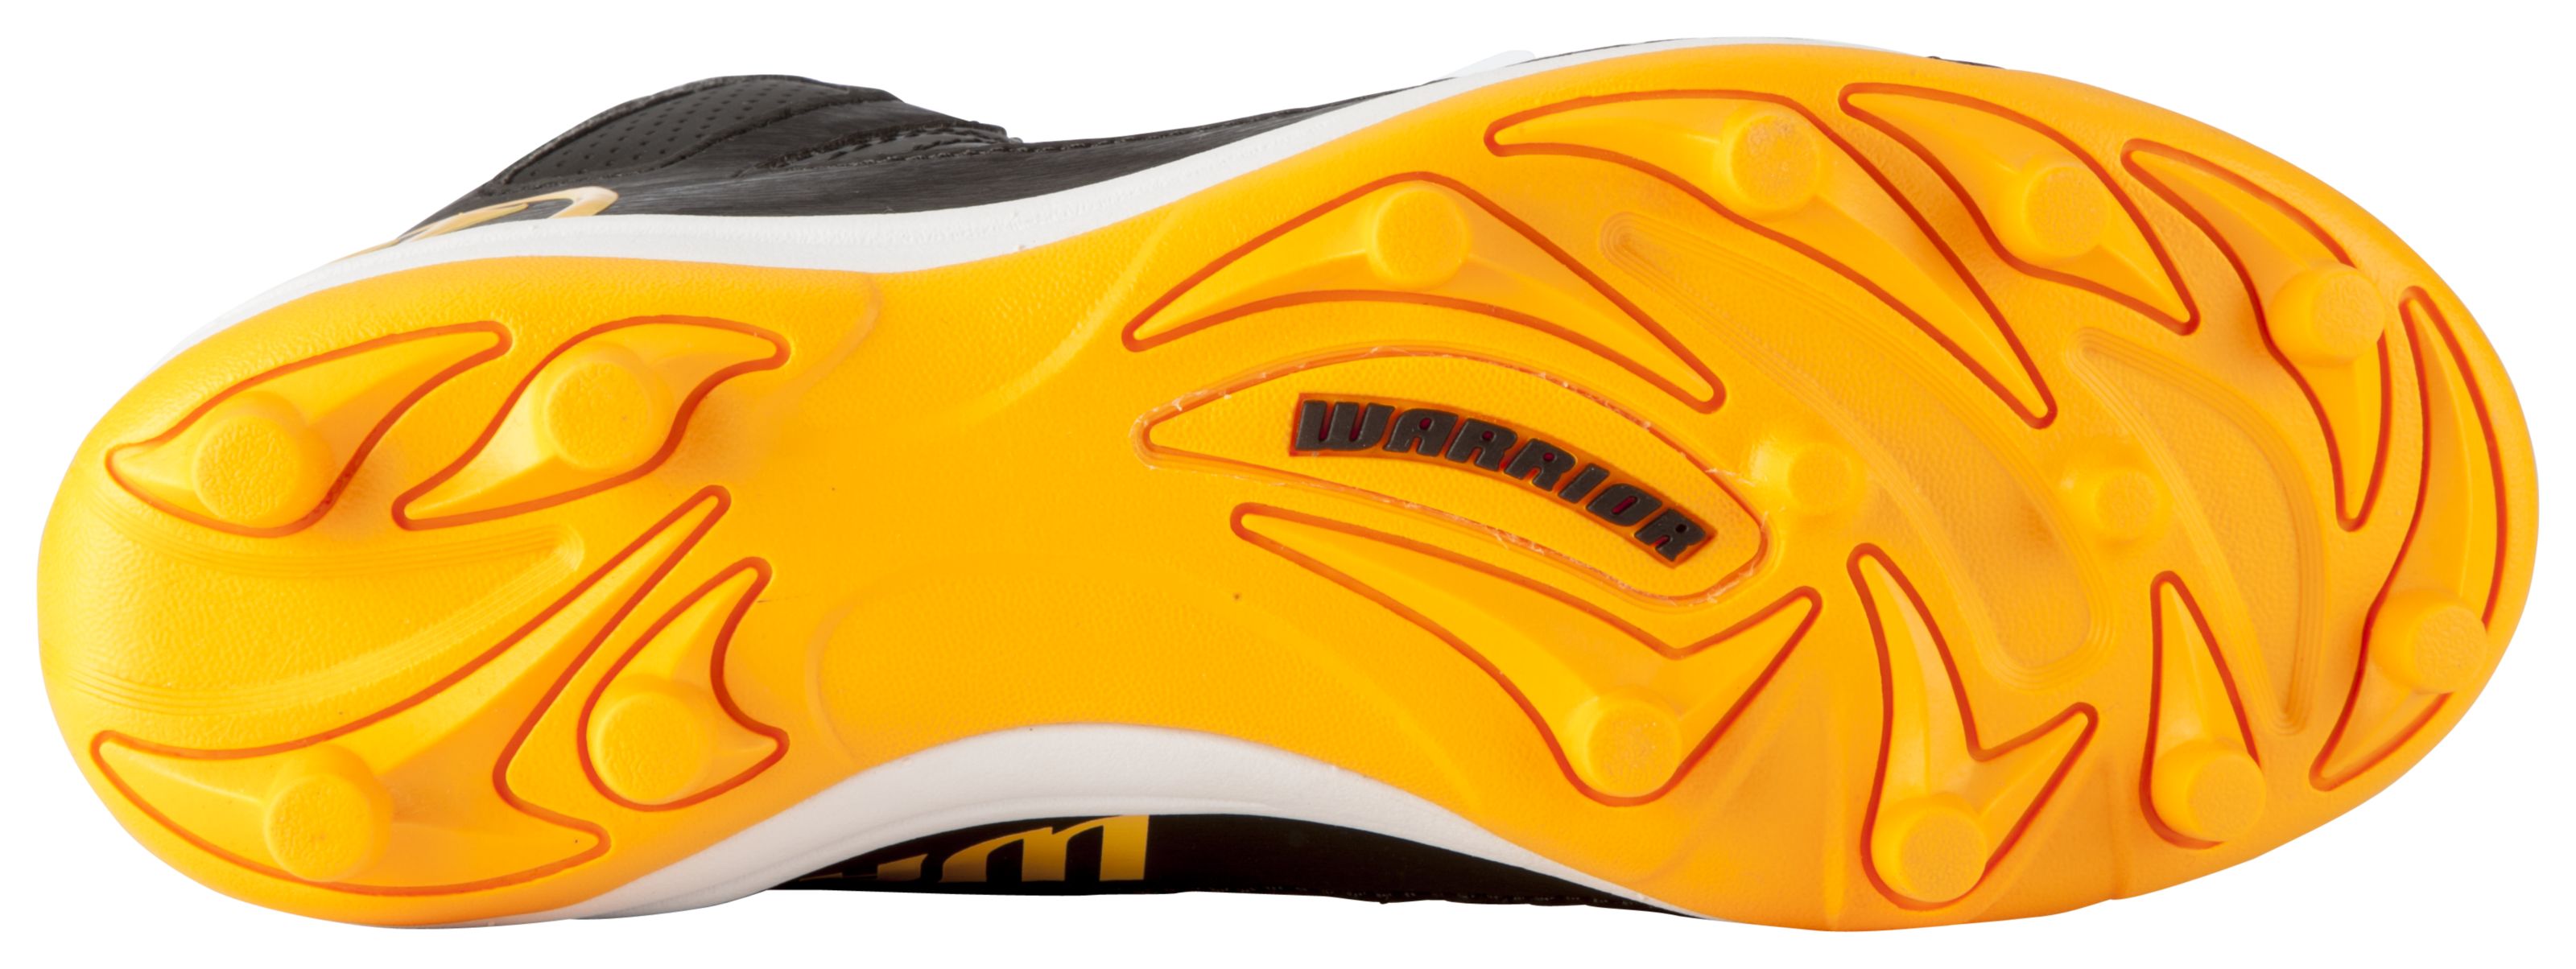 Vex 3.0 Youth Cleat, Black with Orange image number 5